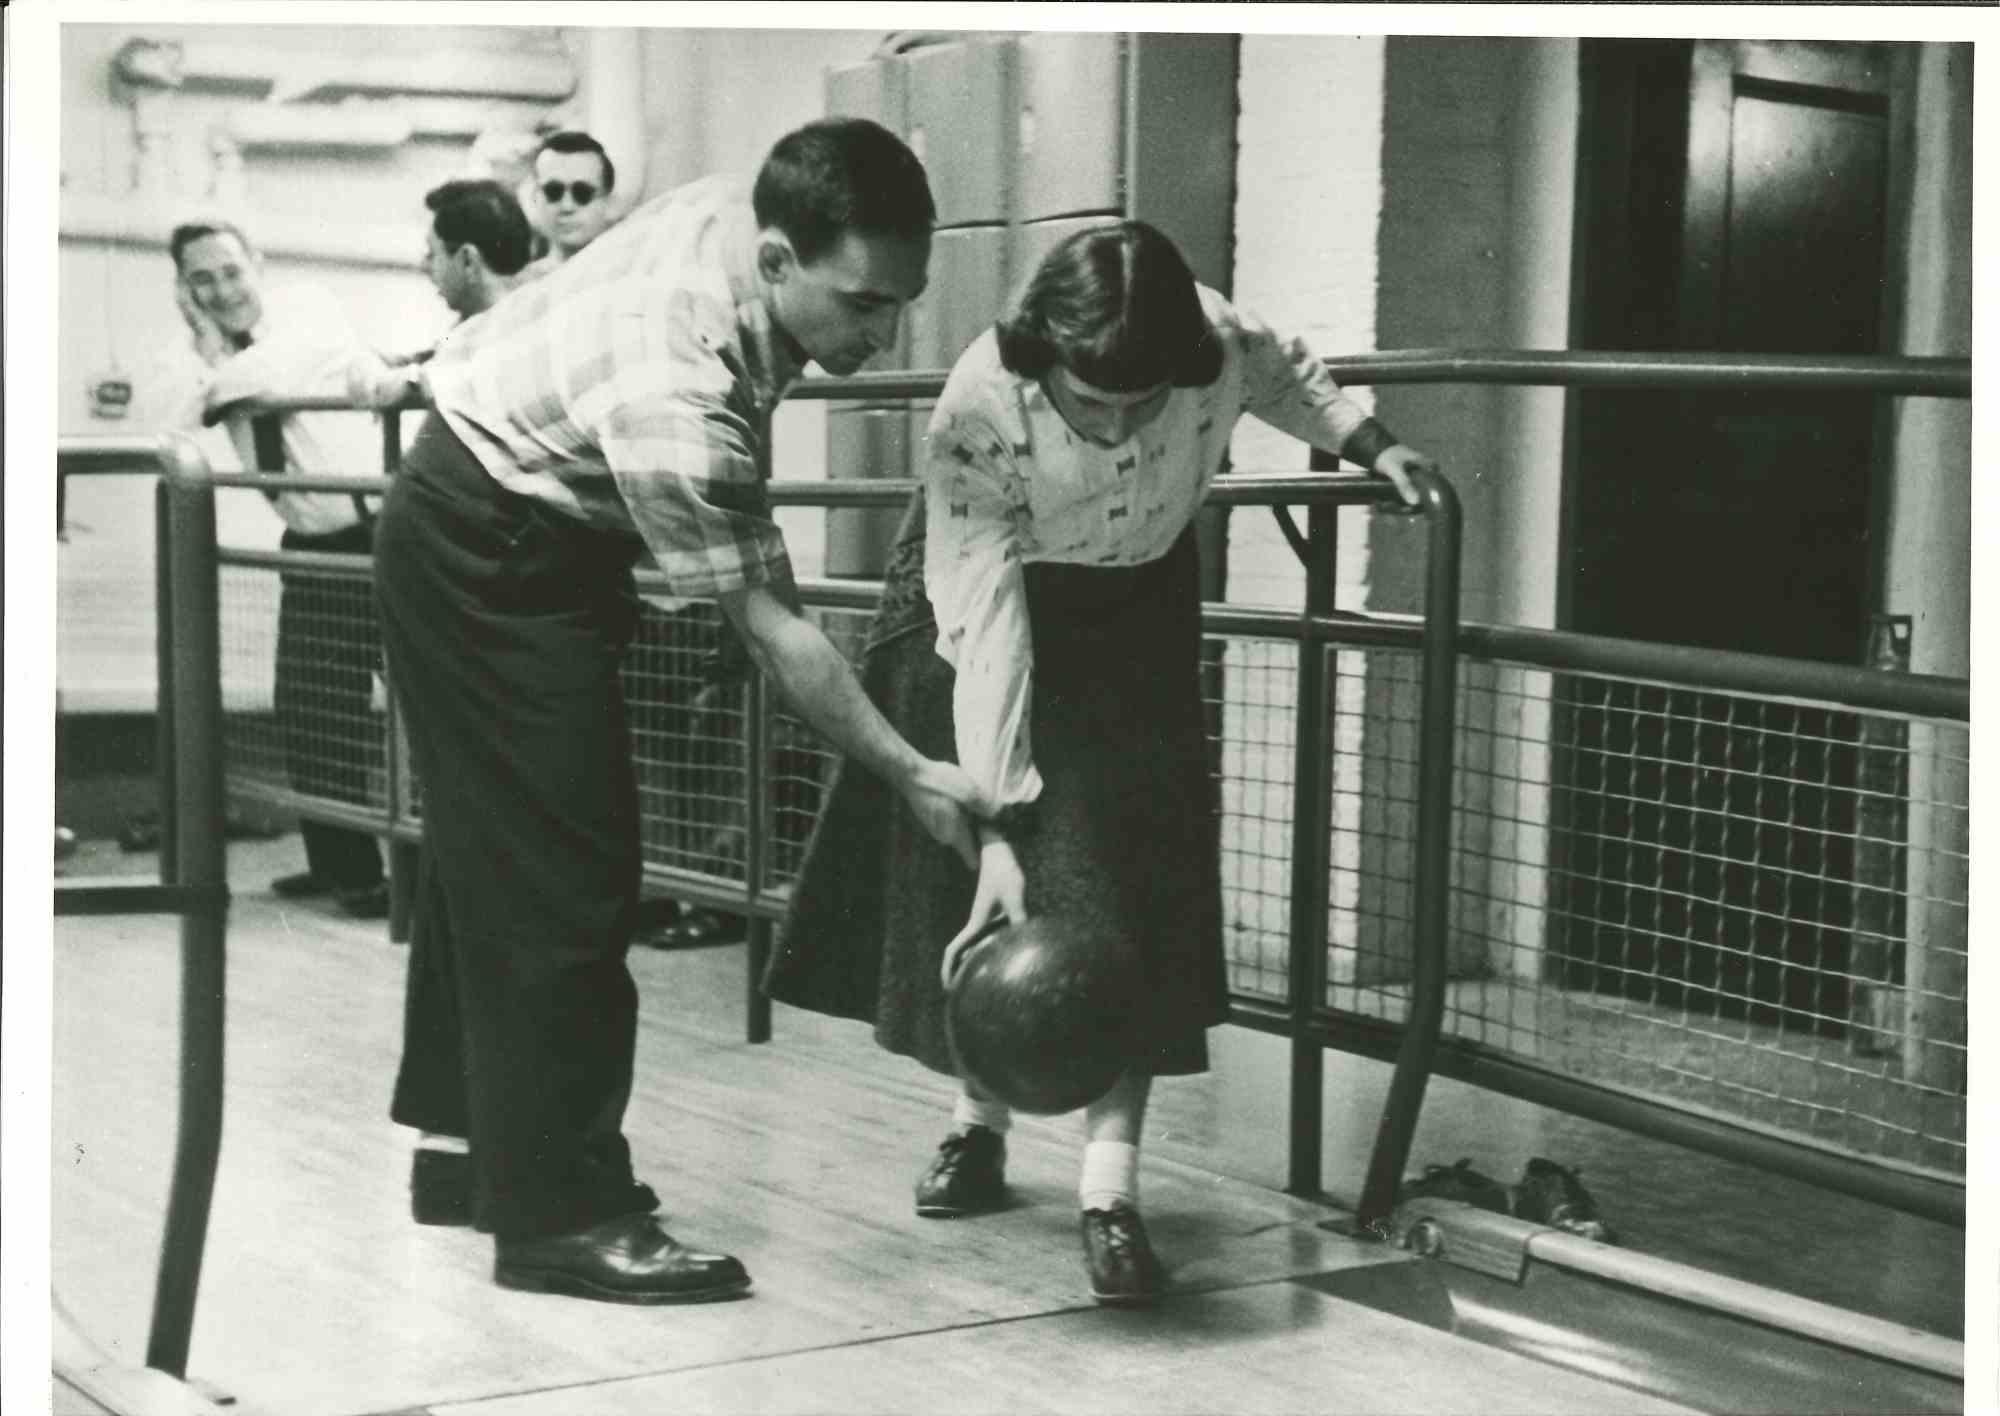 Unknown Figurative Photograph - Bowling -  American Vintage Photograph - Mid 20th Century